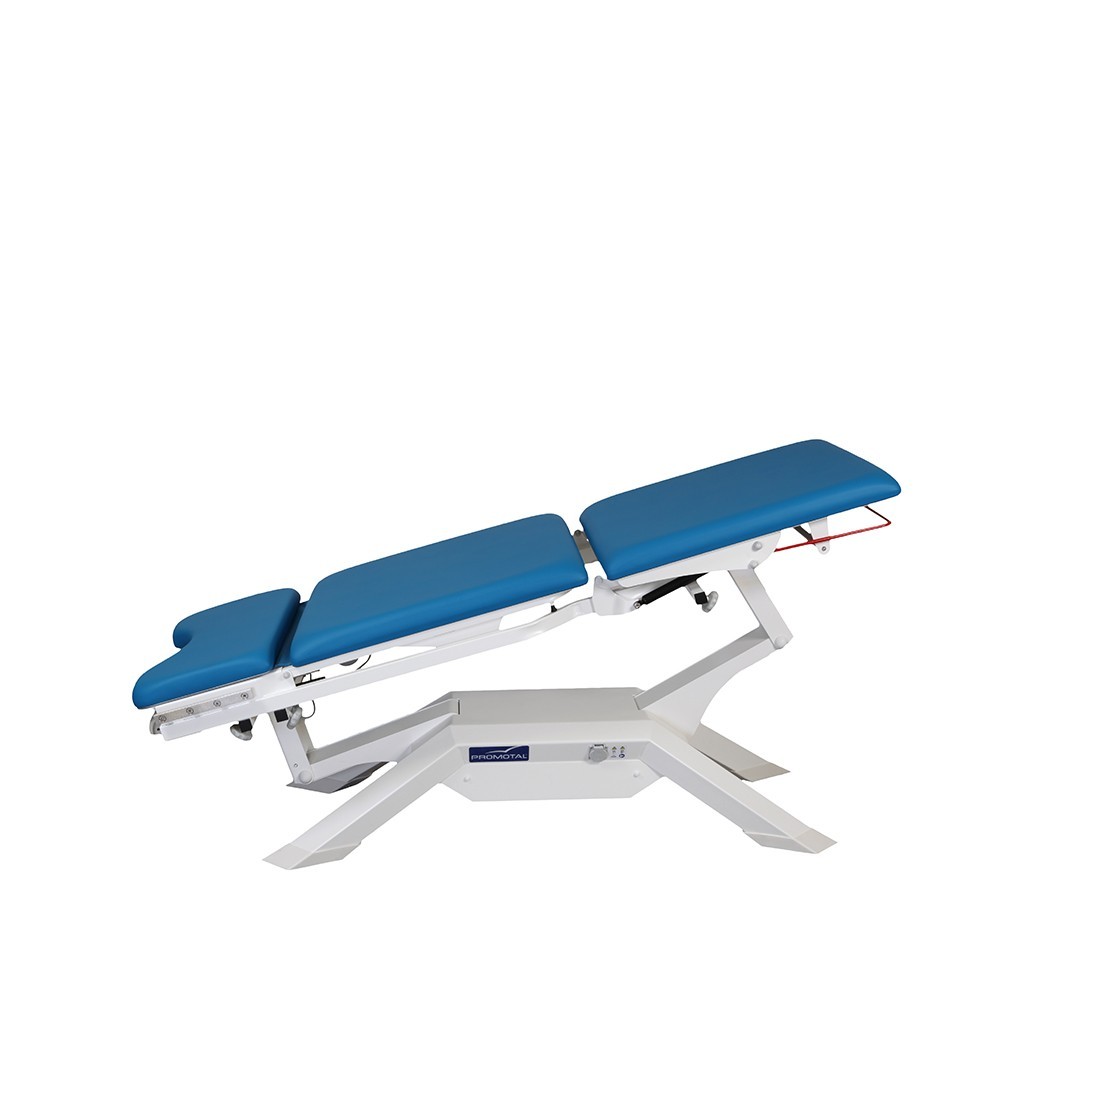 iDuolys - Versatile Medical Couch